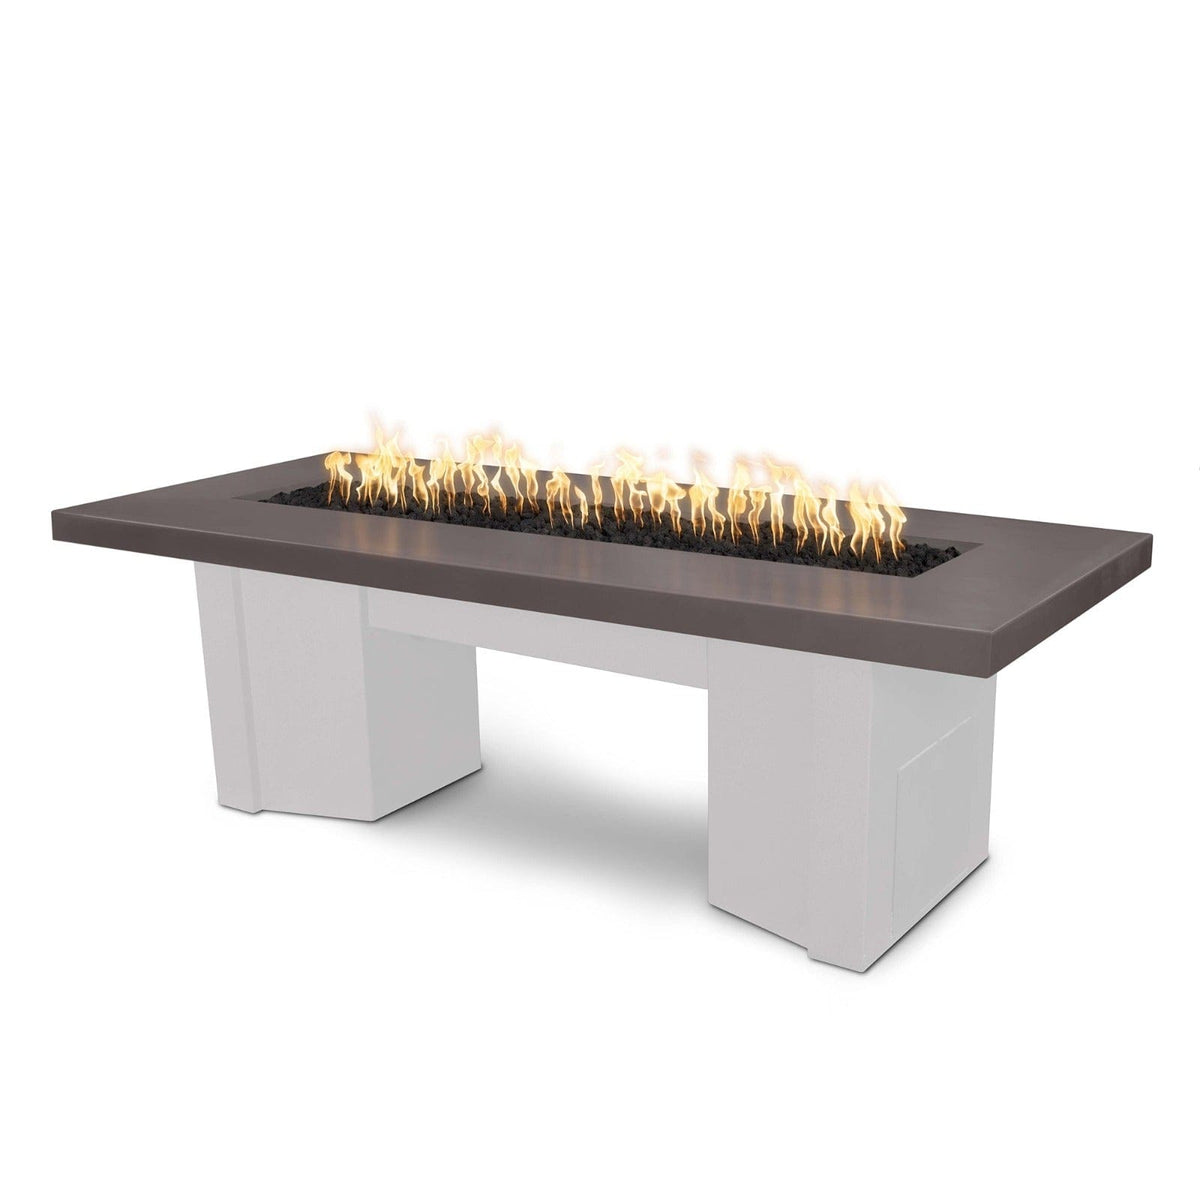 The Outdoor Plus Fire Features Chestnut (-CST) / White Powder Coated Steel (-WHT) The Outdoor Plus 60&quot; Alameda Fire Table Smooth Concrete in Natural Gas - Flame Sense System with Push Button Spark Igniter / OPT-ALMGFRC60FSEN-NG